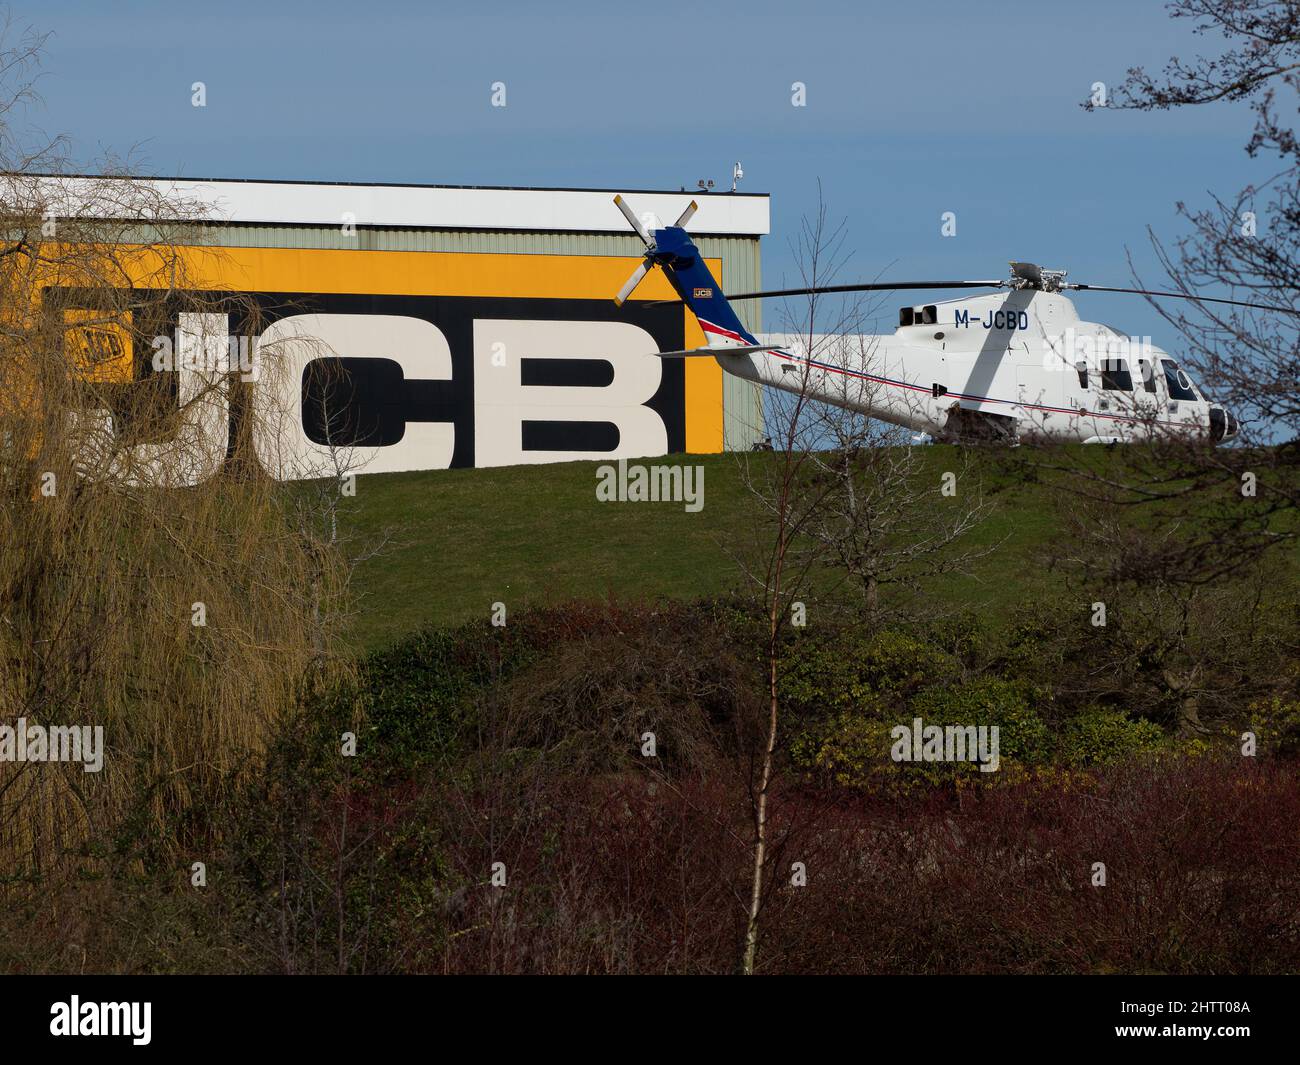 Helicopter landed at JCB World Headquarters in Rocester, Staffordshire Stock Photo